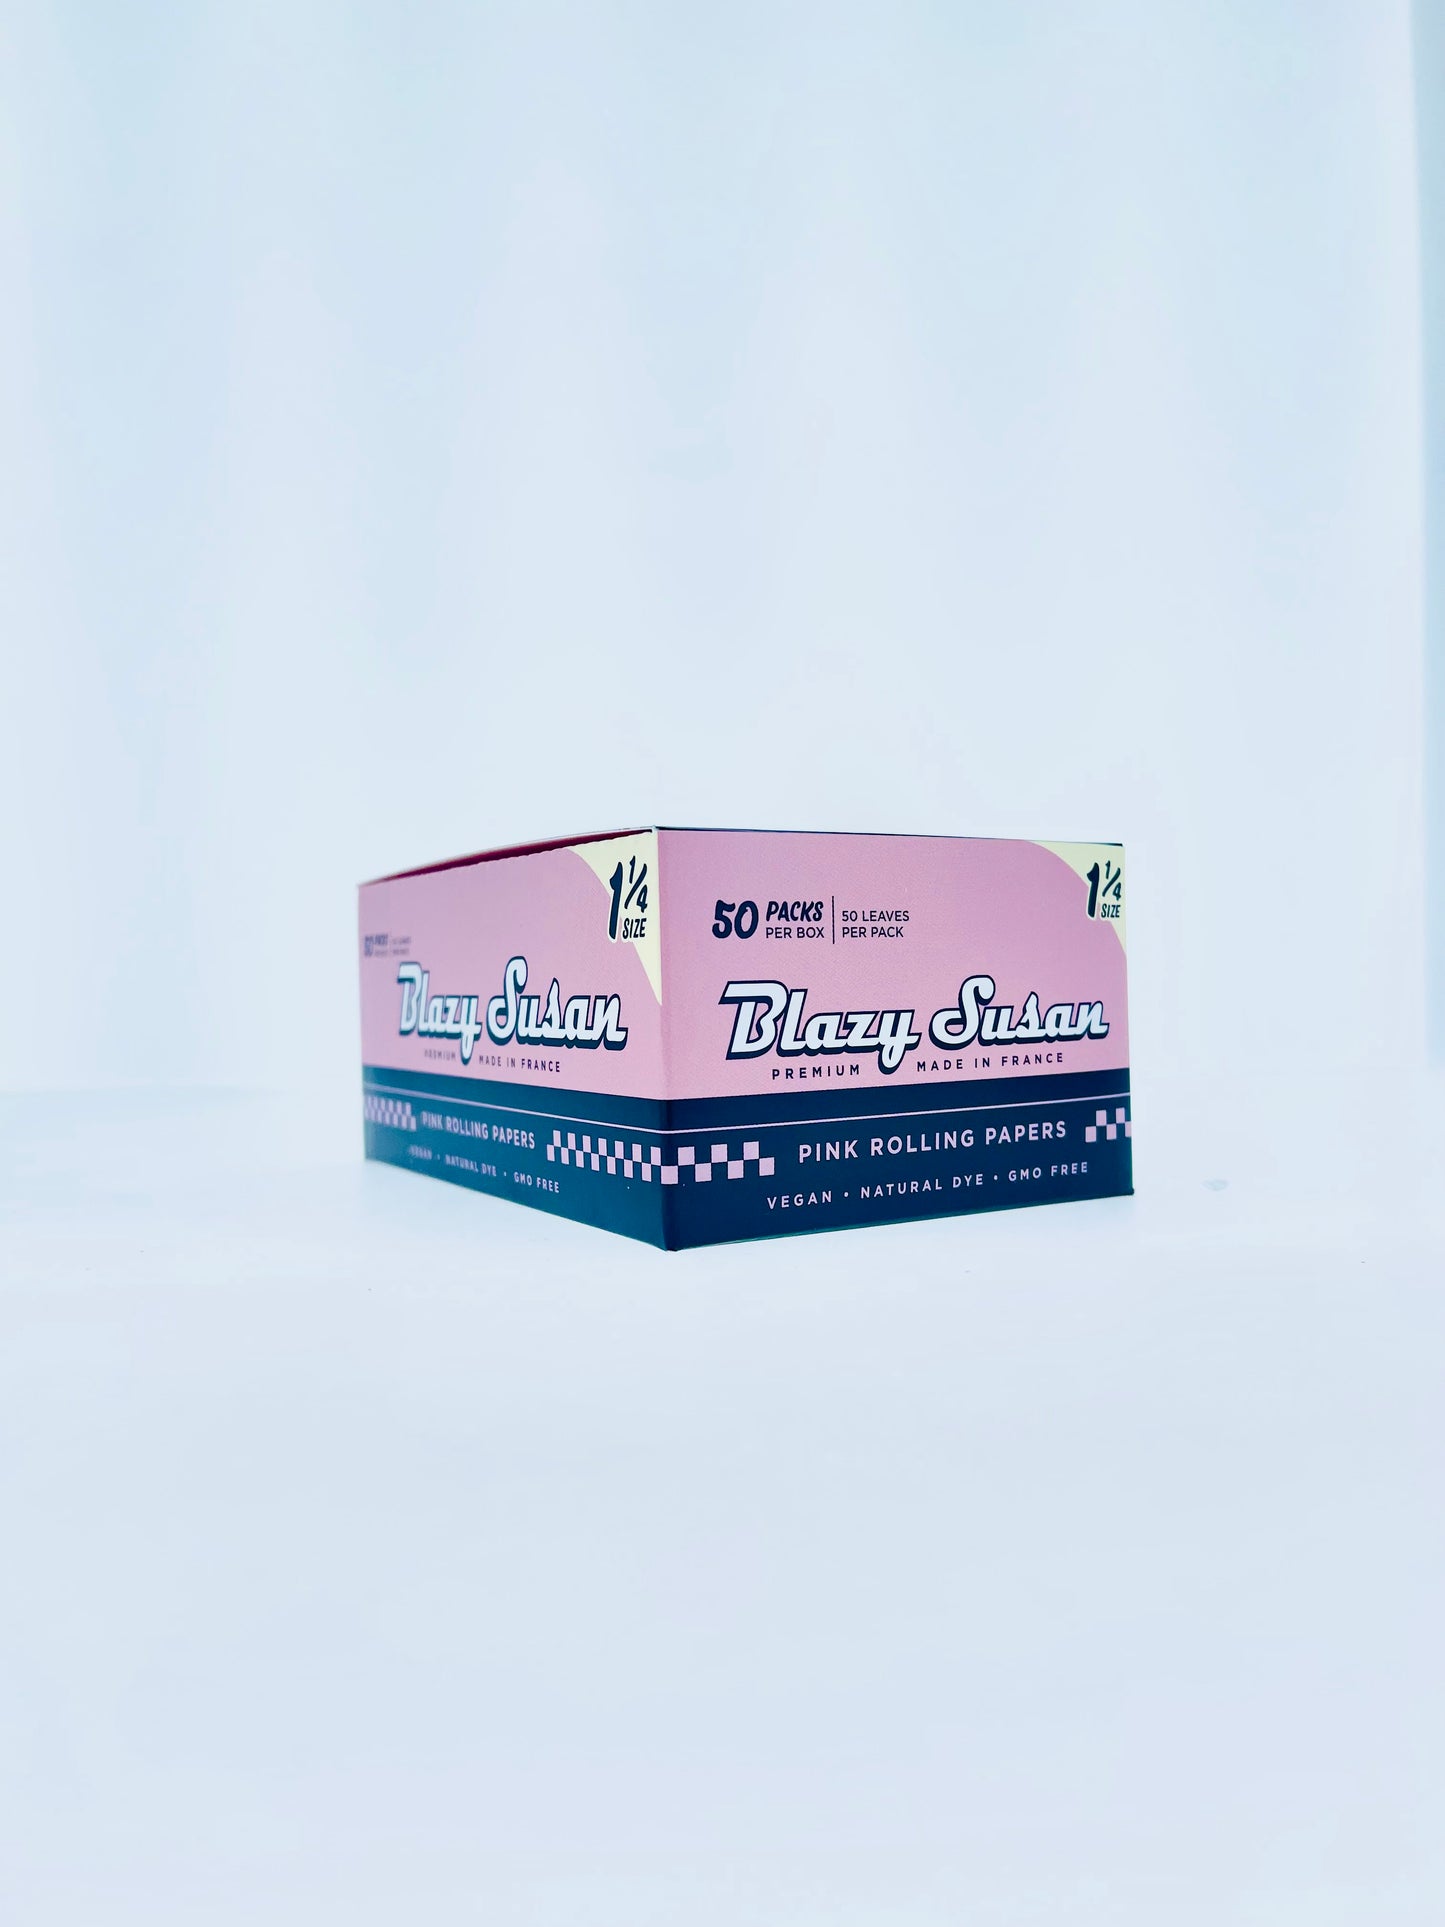 Blazy Susan Rolling Papers